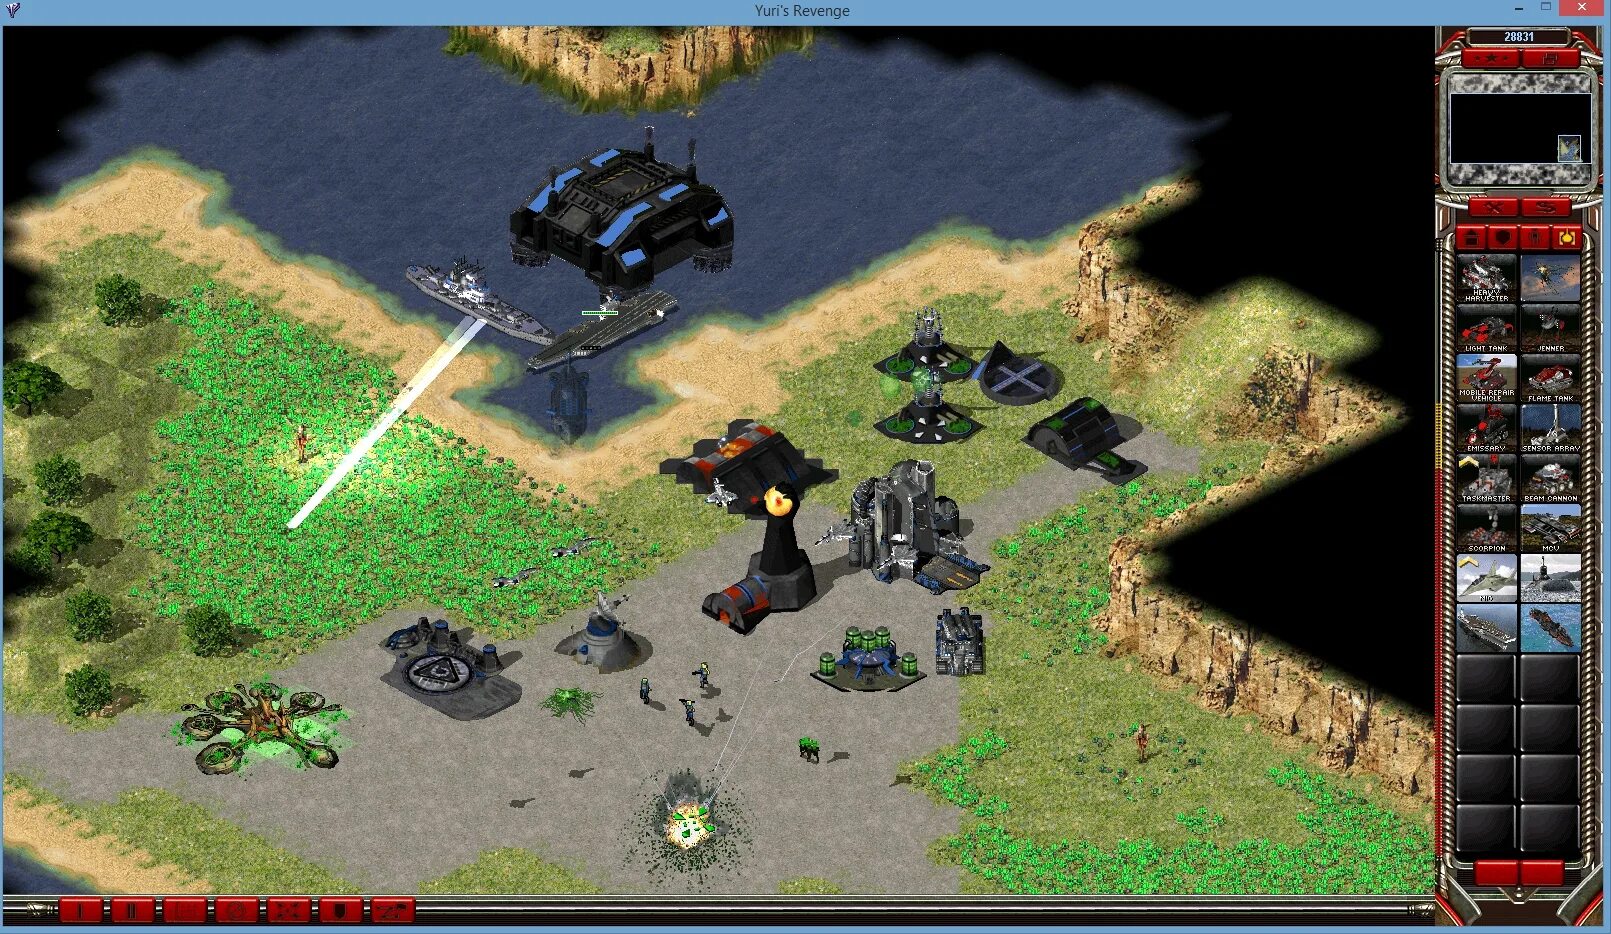 Command & Conquer: Red Alert 2. Command & Conquer: Red Alert 2 - Yuri's Revenge. Command conquer revenge